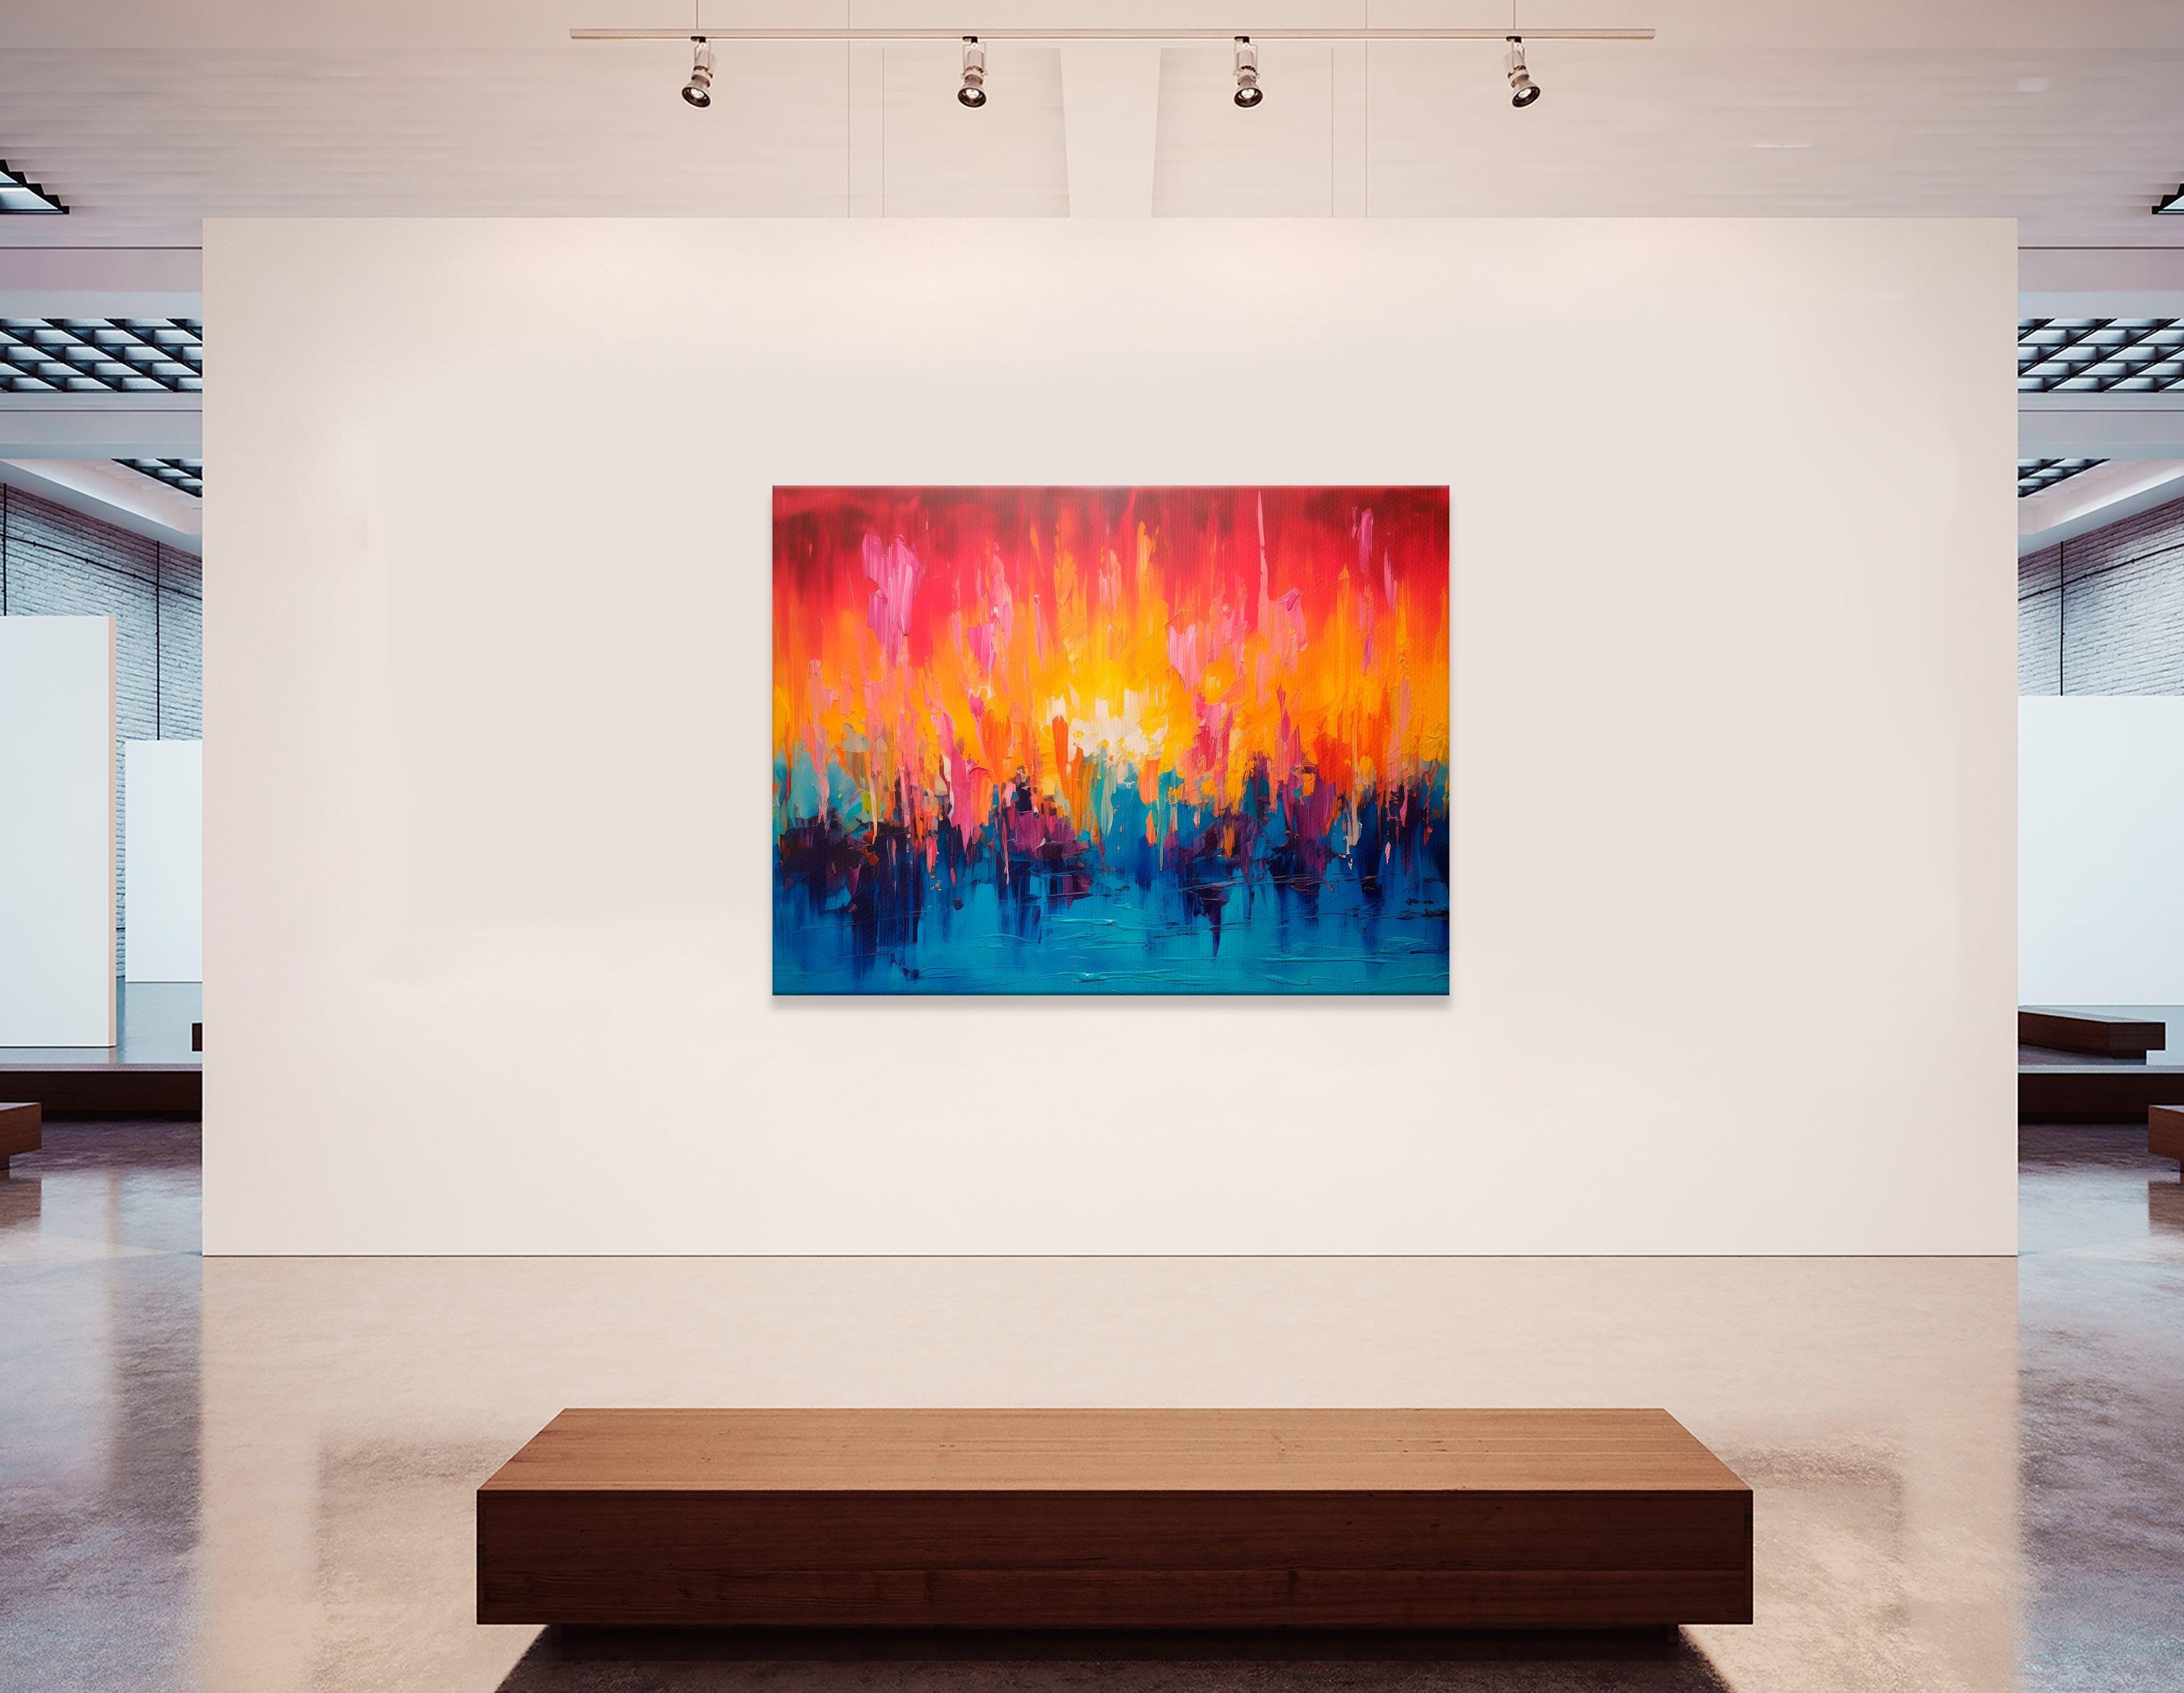 Abstract Sunset in Orange and Blue - Canvas Print - Artoholica Ready to Hang Canvas Print